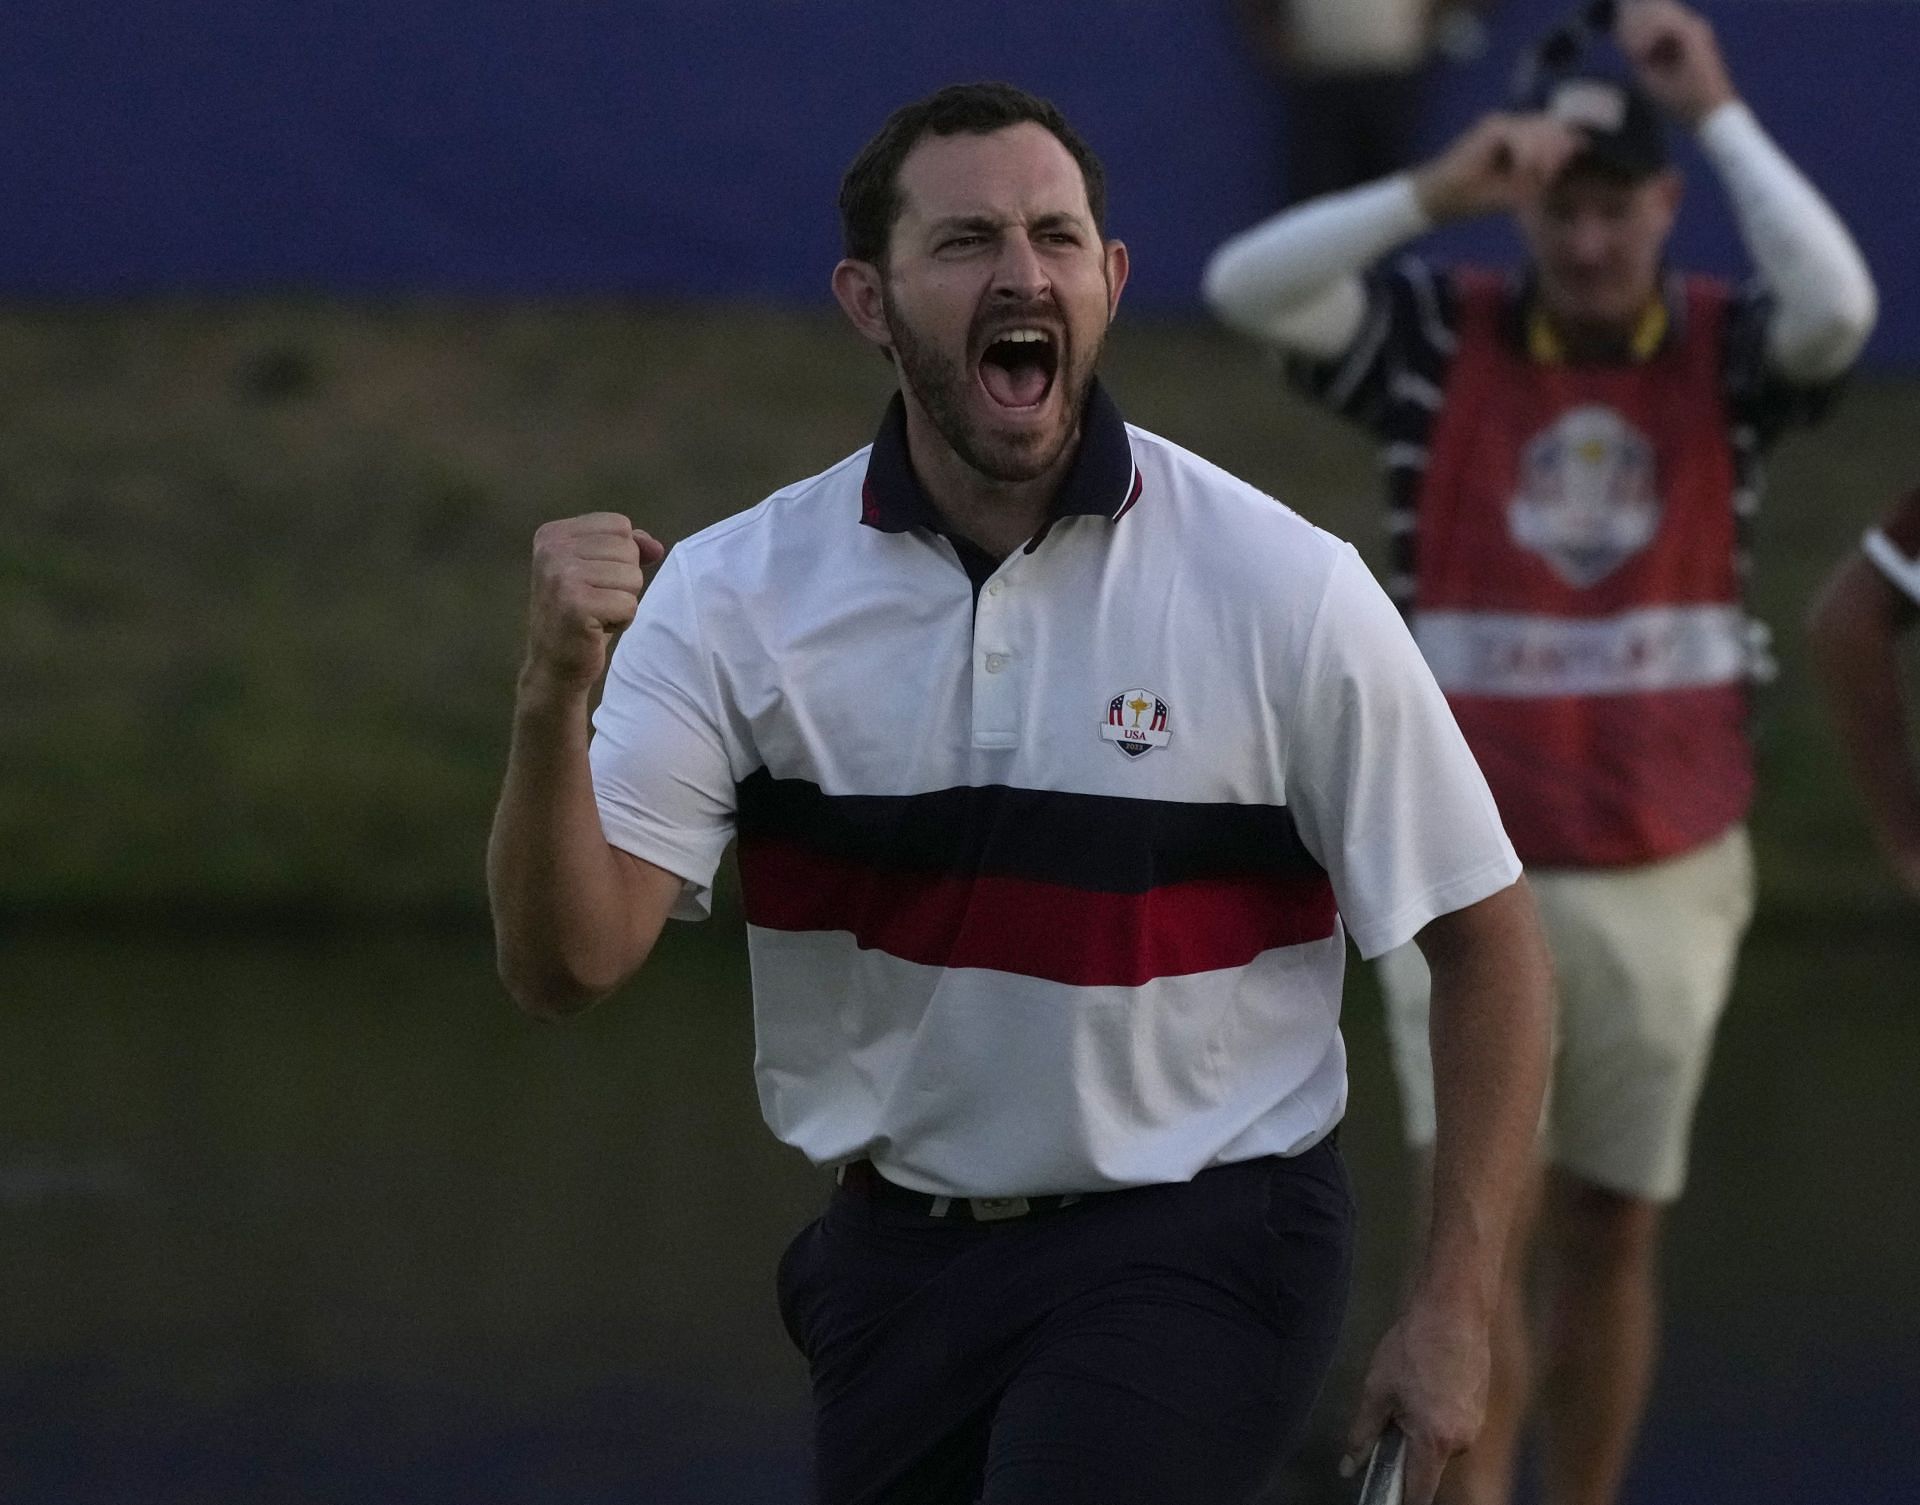 United States&#039; Patrick Cantlay celebrates after holeing his putt on the 18th green to win the afternoon Fourballs match by 1 at the Ryder Cup (Image via AP Photo)